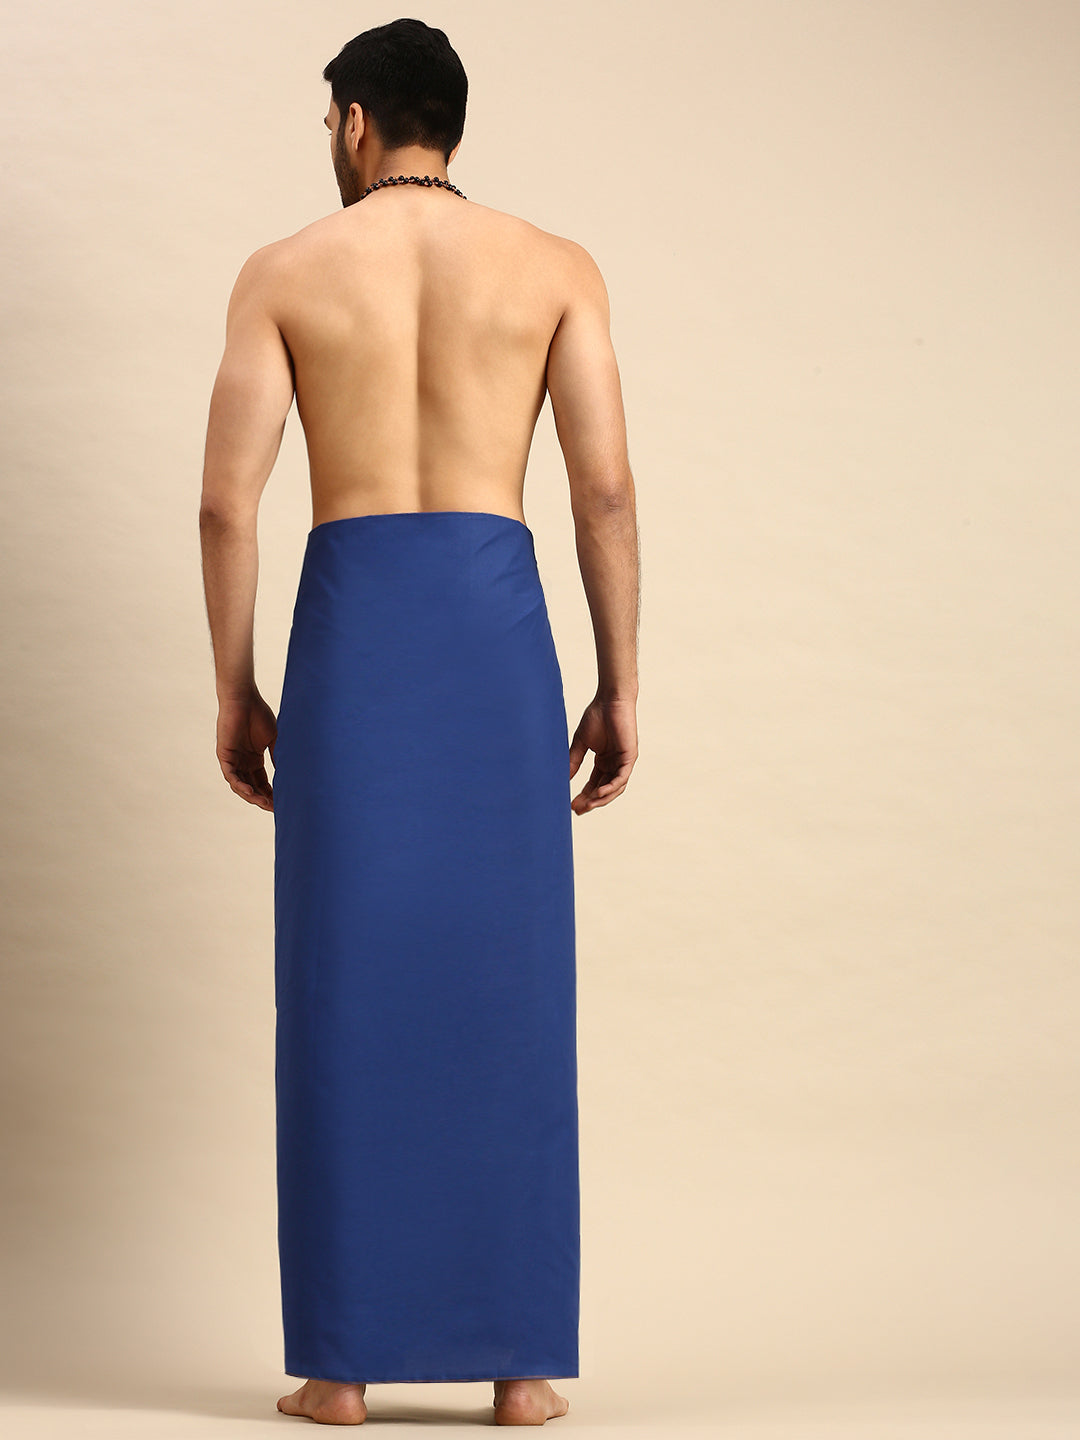 Mens Devotional Dhoti With Small Border Sudhan Blue